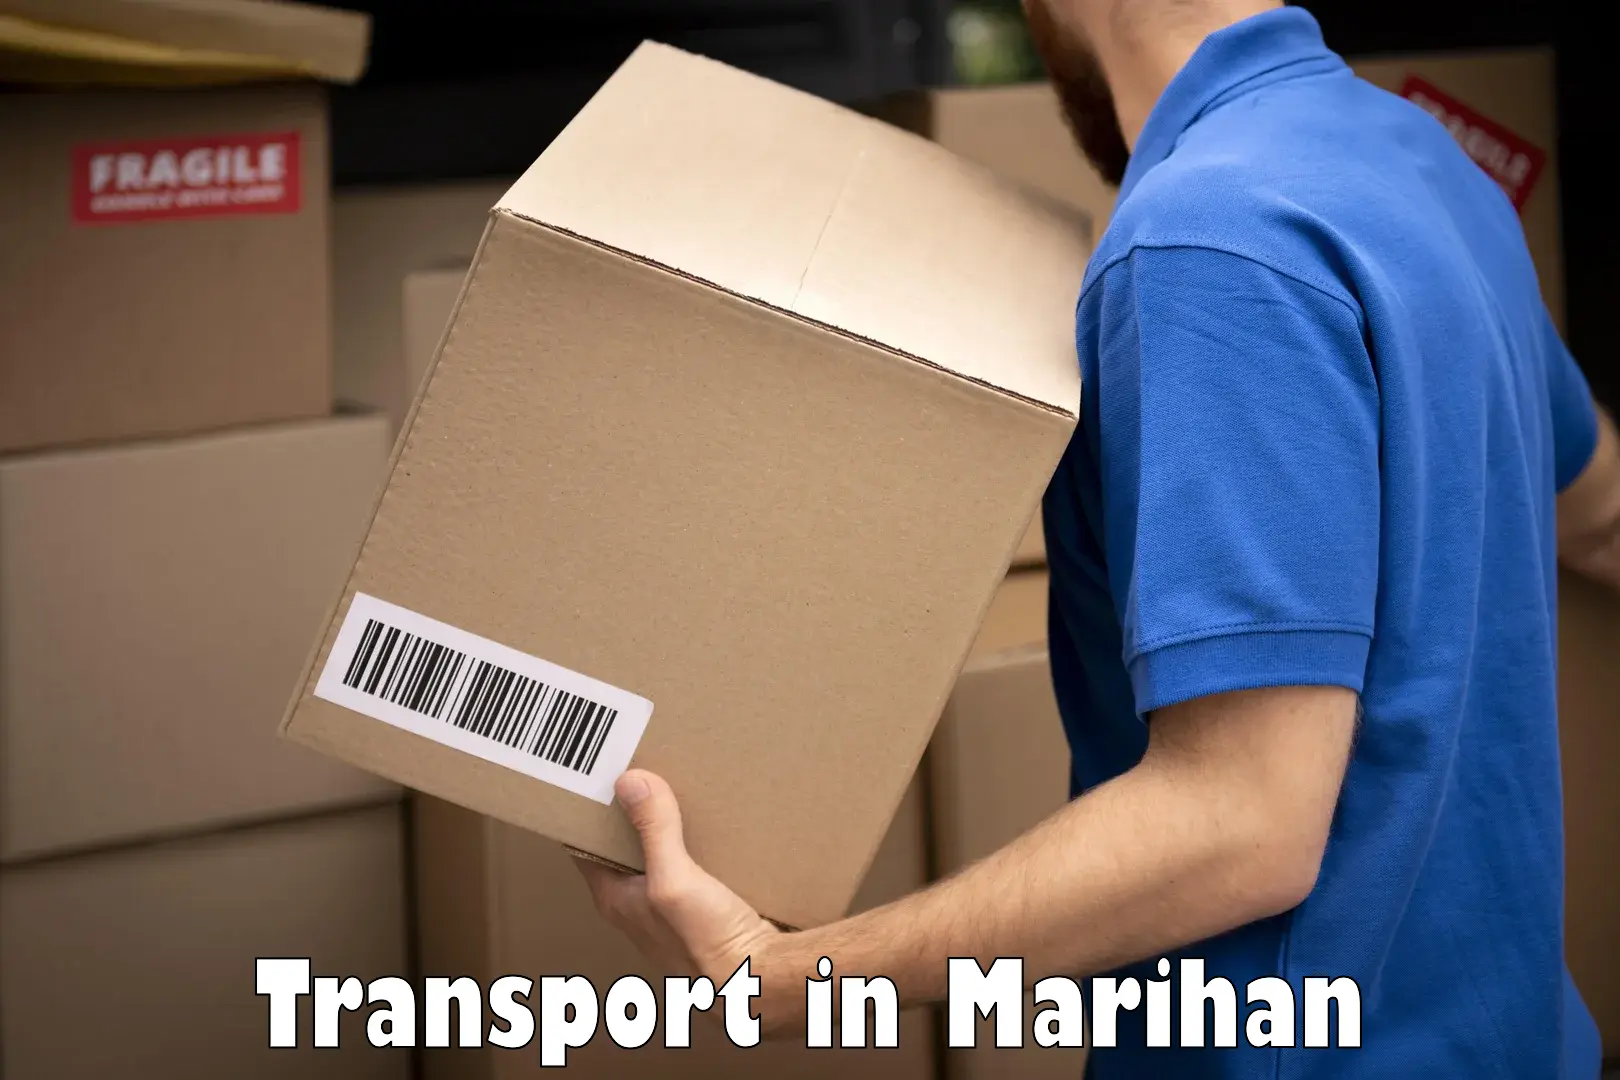 Vehicle transport services in Marihan